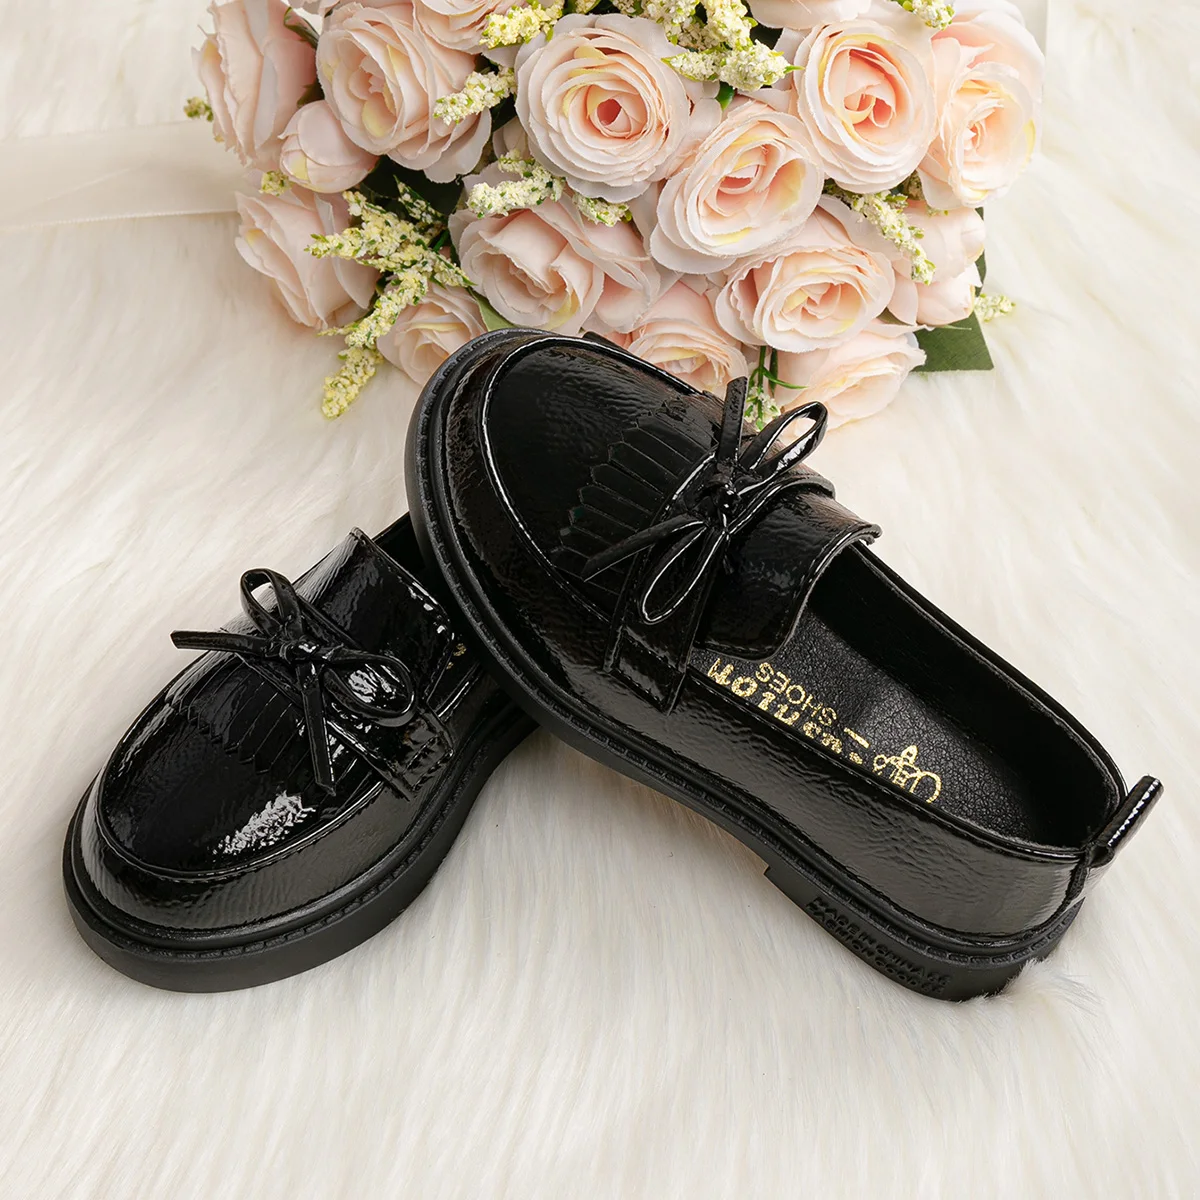 Customized wholesale  Black party school shoes  Mary Jane Uniform  Soft rubber bottom  Glossy black PU fabric  kids girl shoes